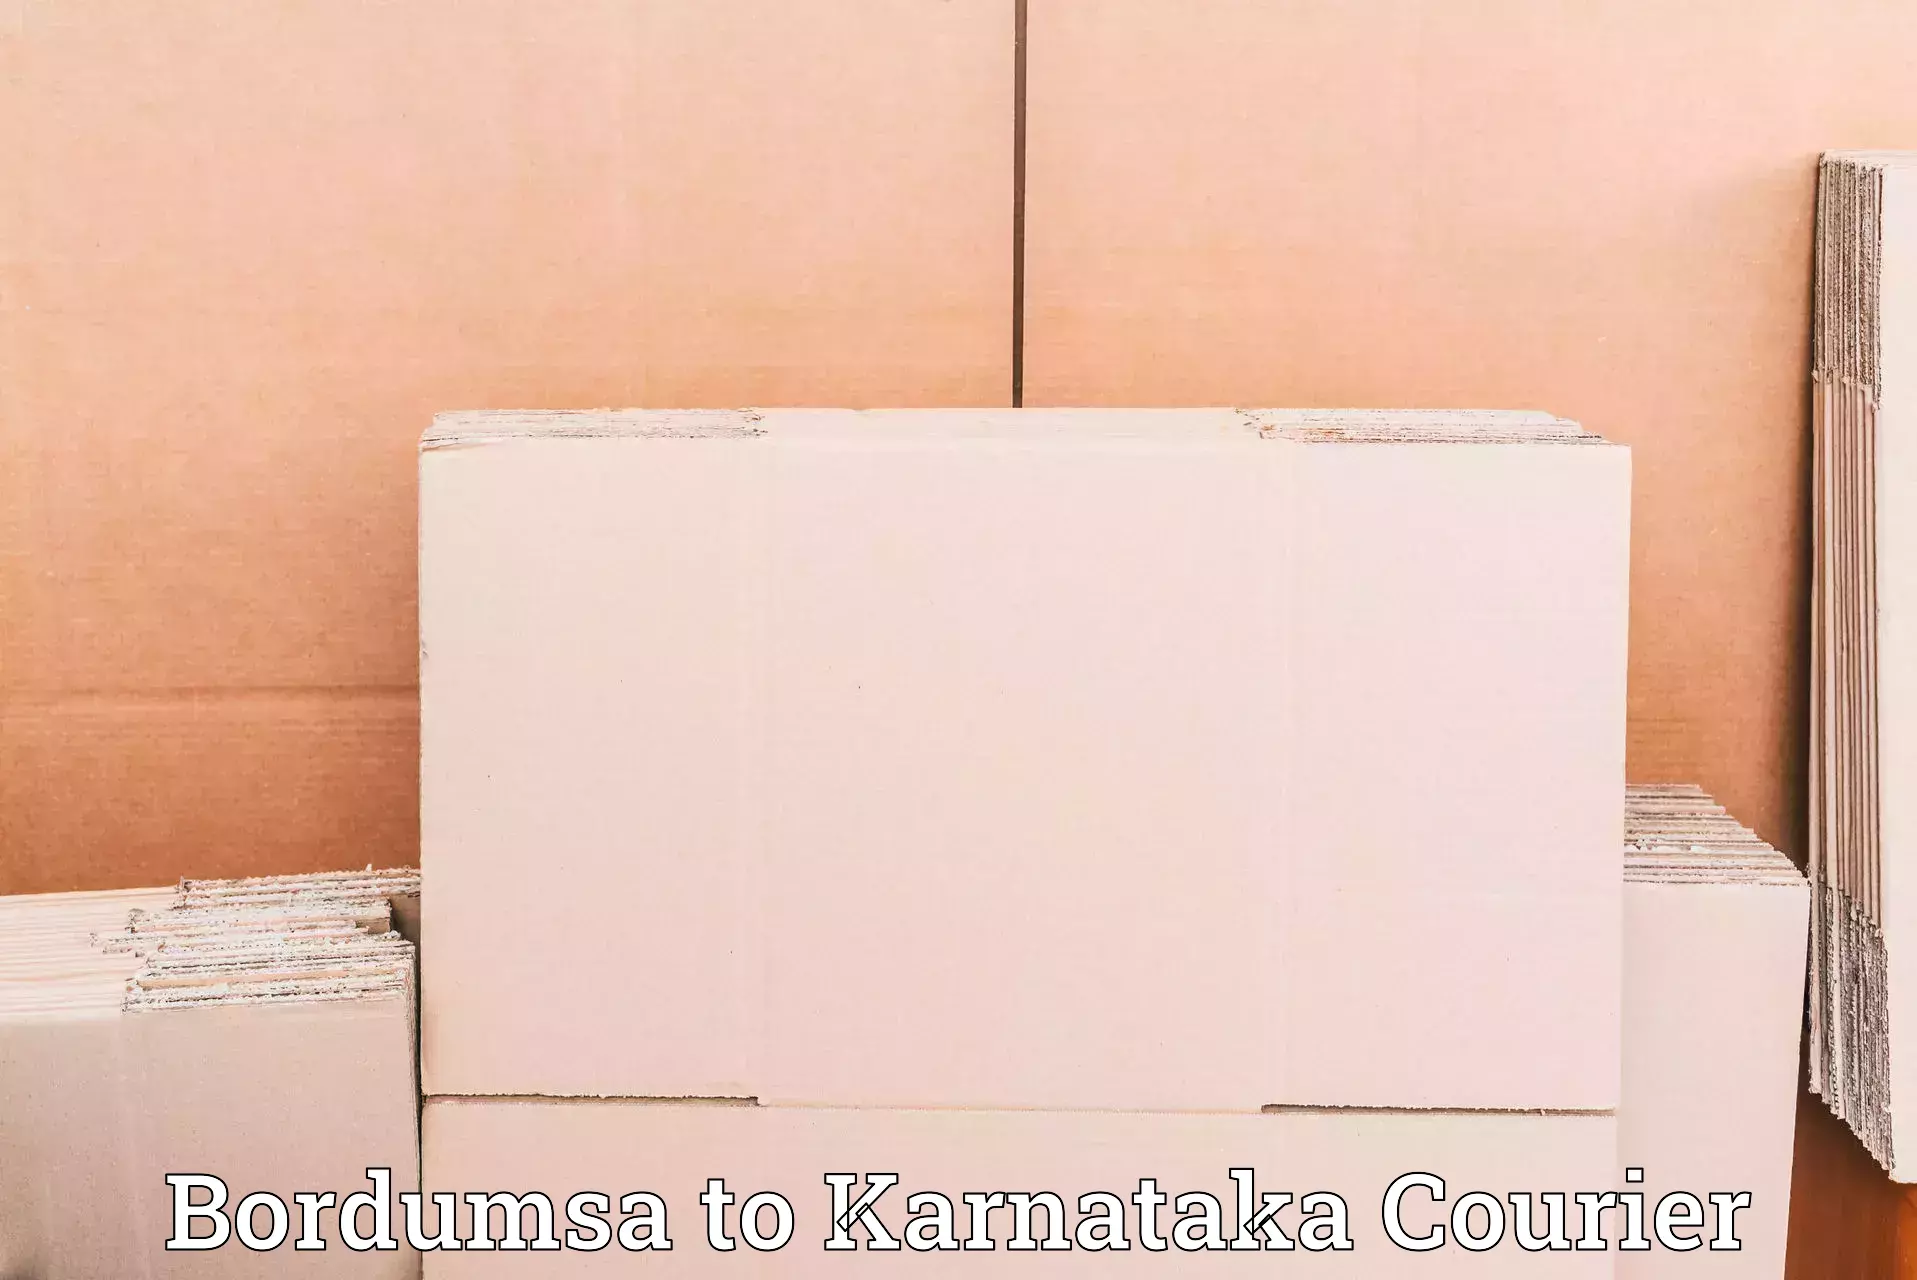 Next-generation courier services Bordumsa to Dharwad